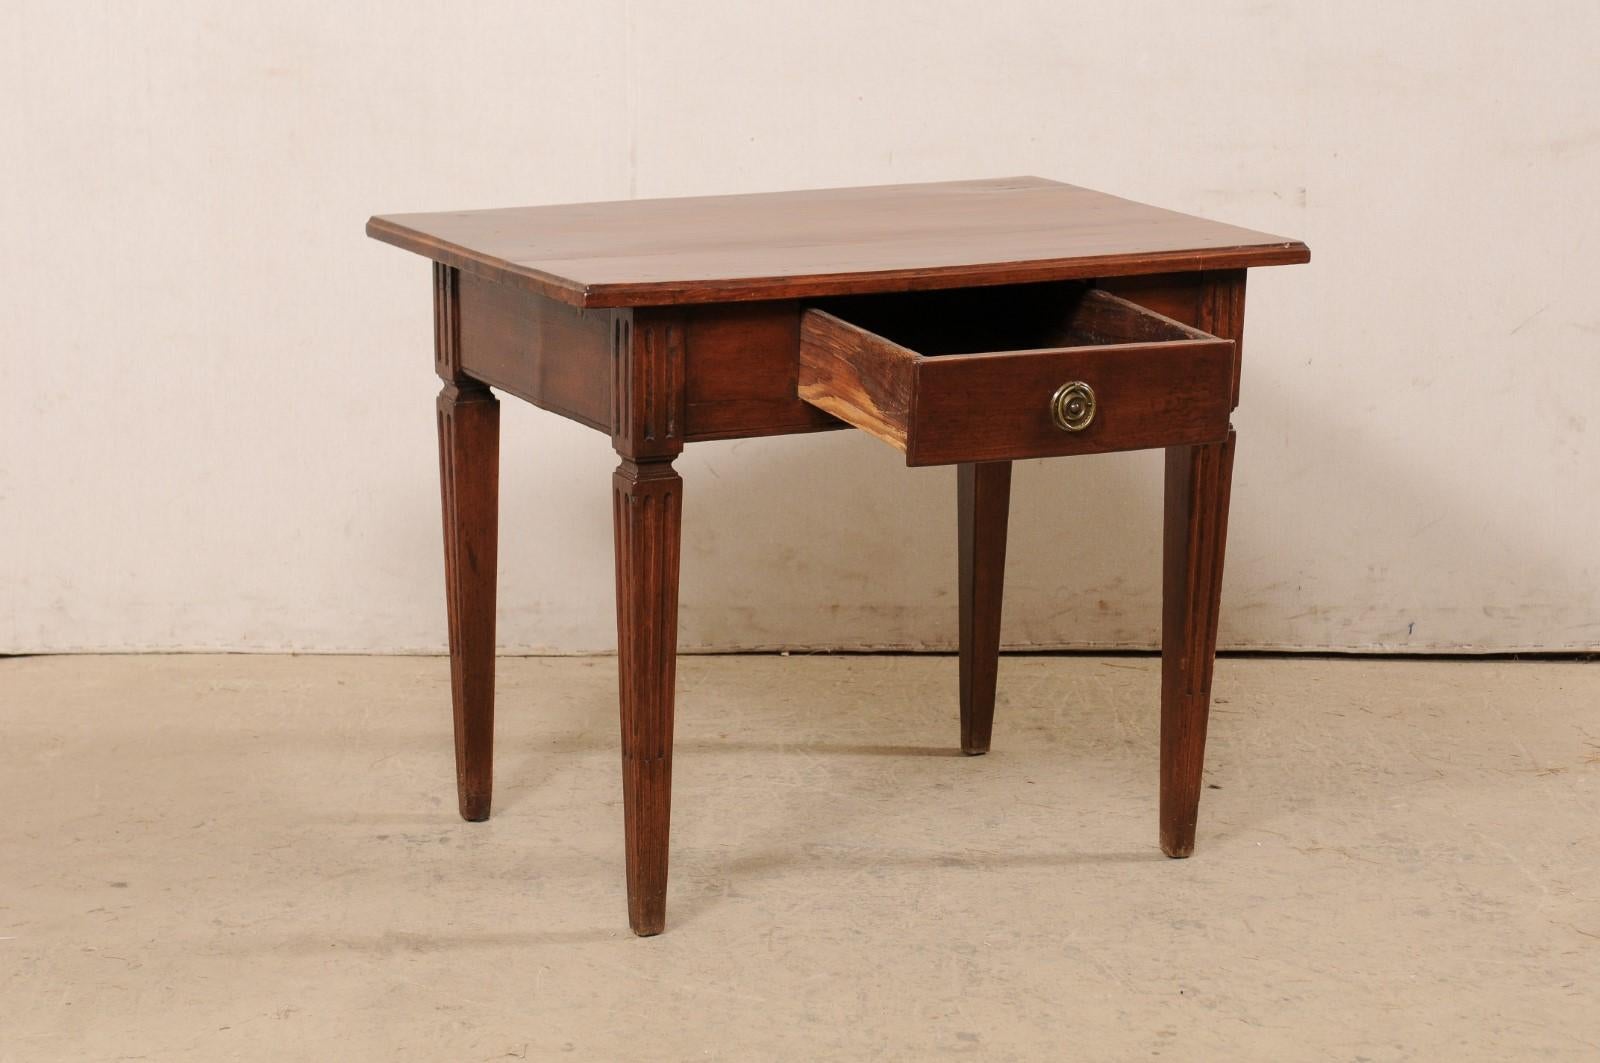 An Italian carved-wood table with drawer from the 19th century. This antique table from Italy has a rectangular-shaped top, which overhangs an apron which houses a single drawer at one side (minimally adorn with a brass ring pull, and clean,